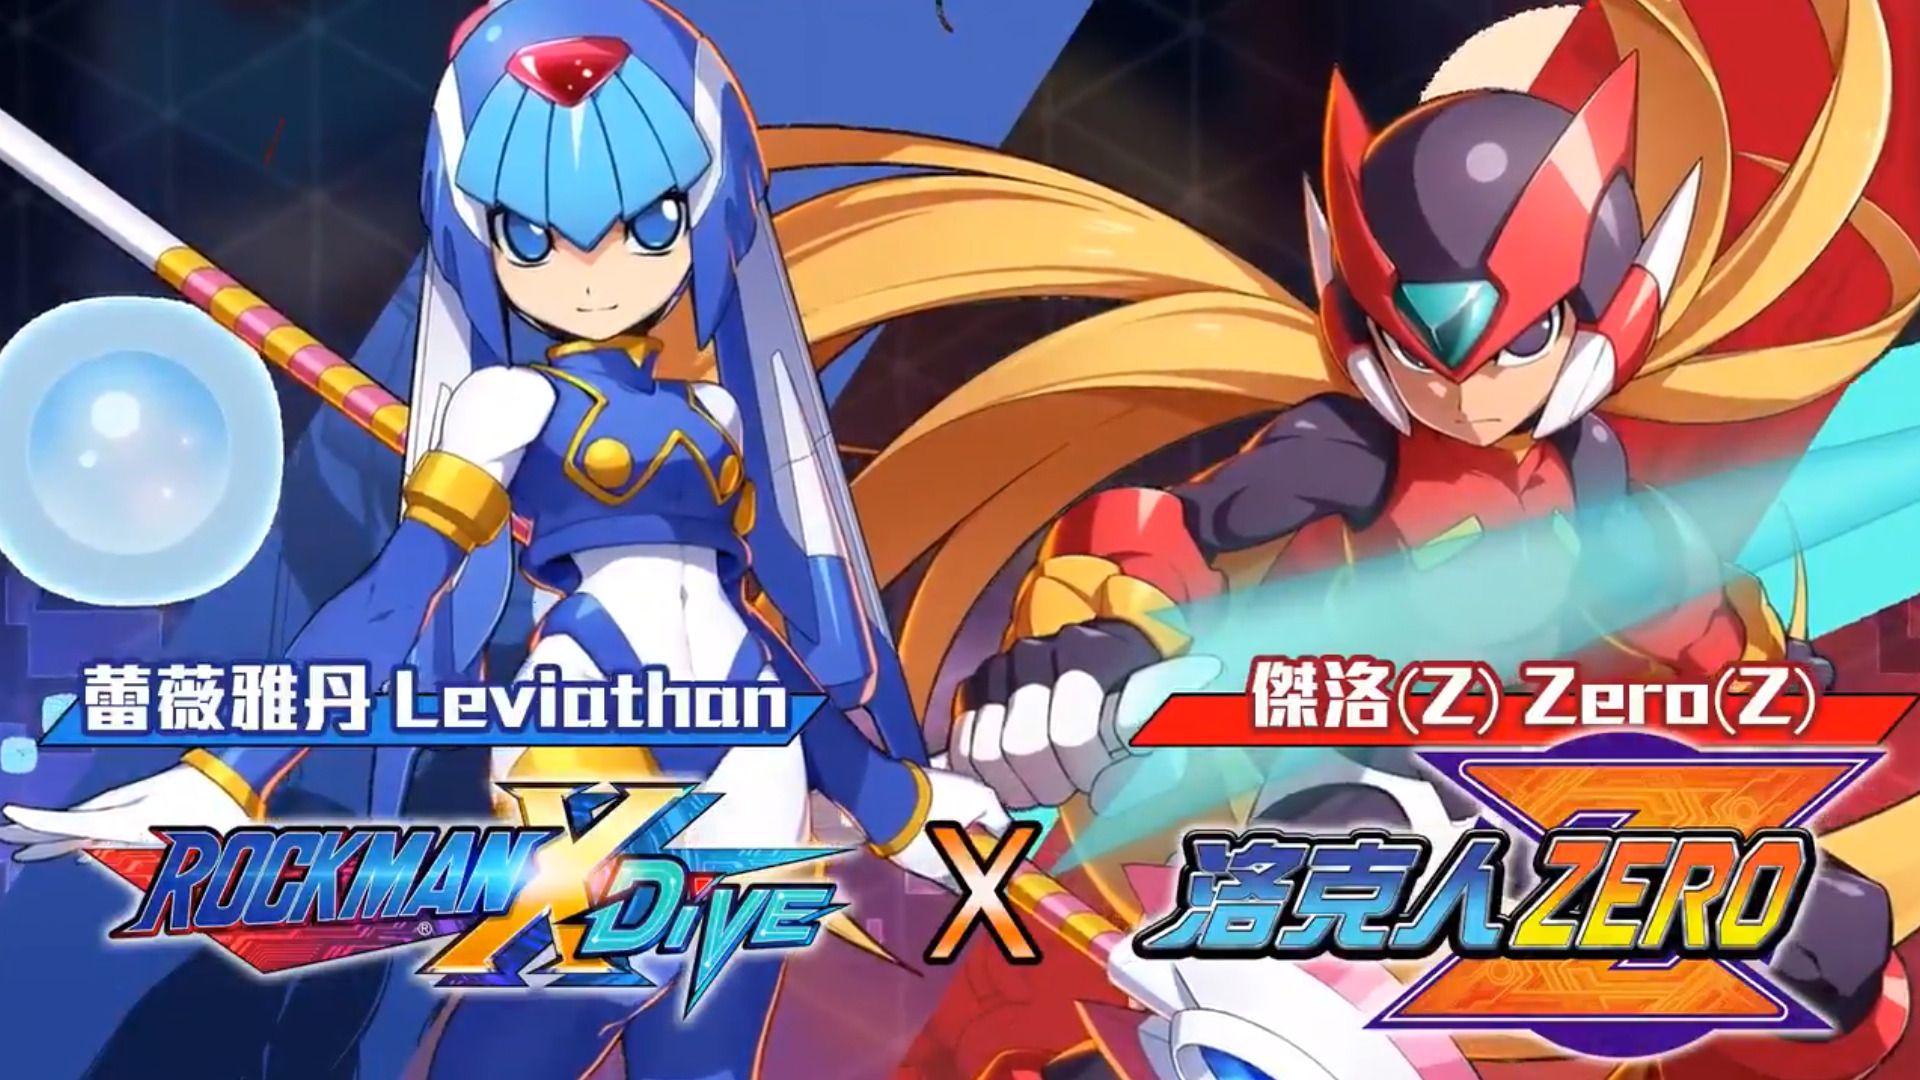 Mega Man X DiVE Crosses Over With Mega Man Zero With Collab Event